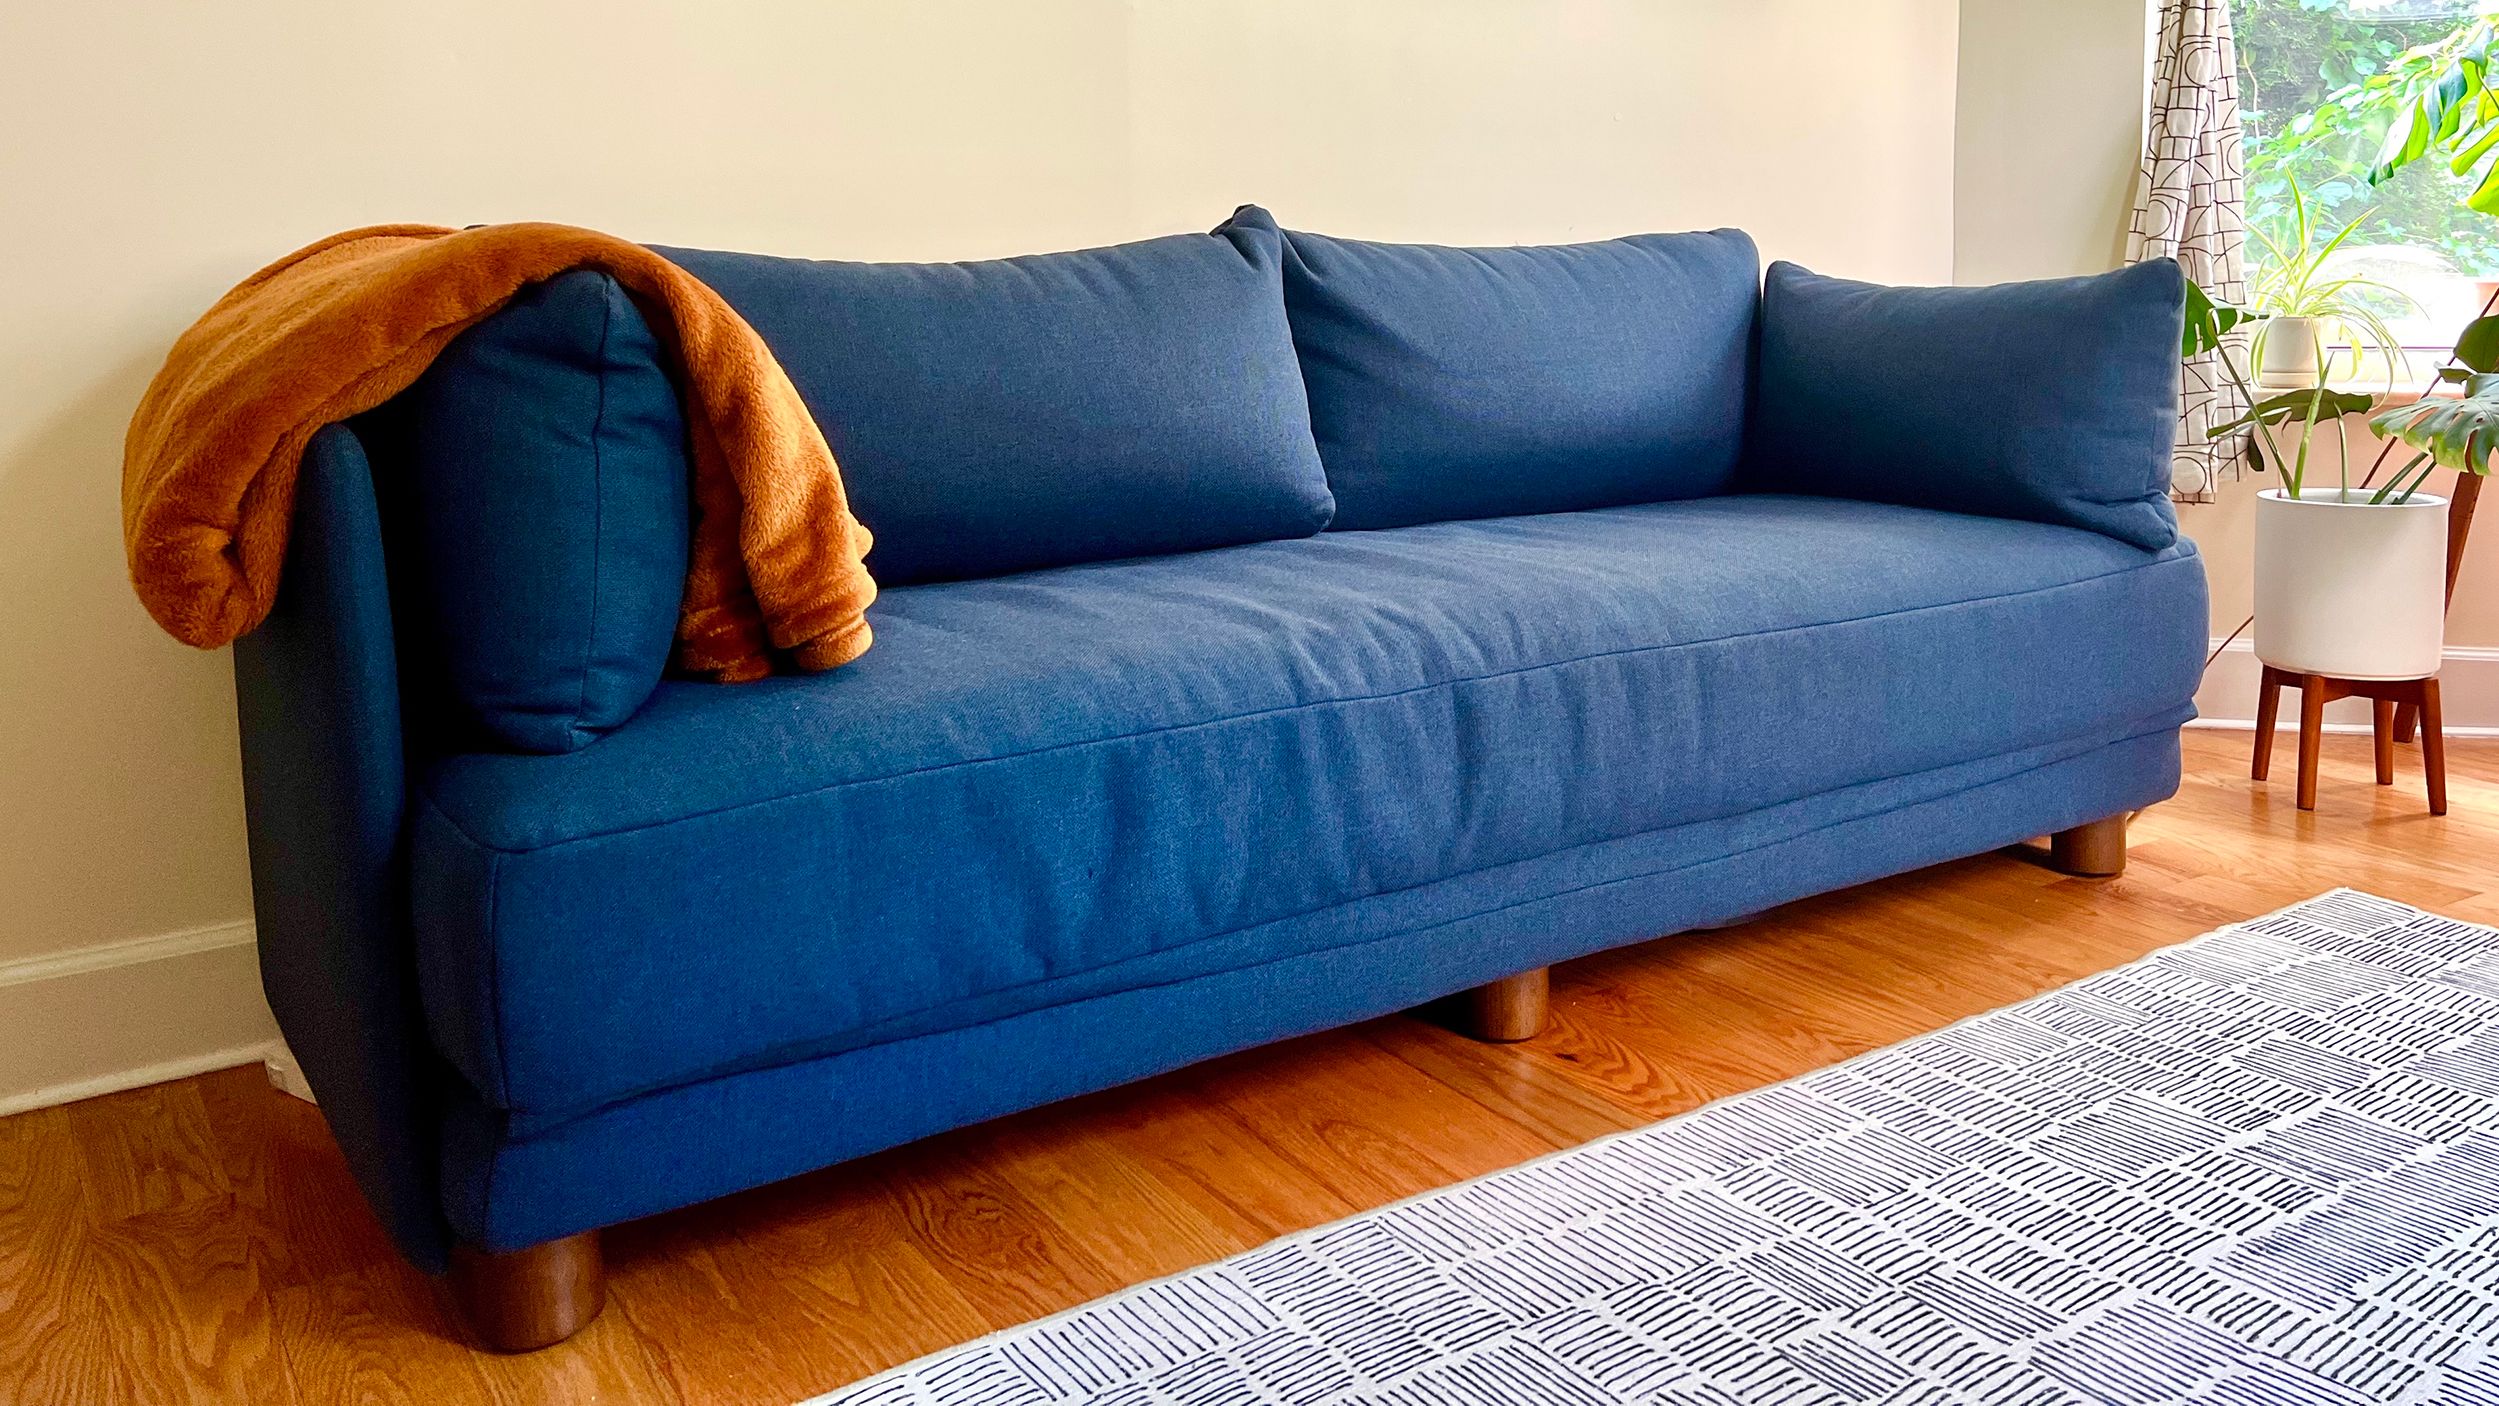 Here's Exactly What Furniture Retains Its Value The Best Over Time